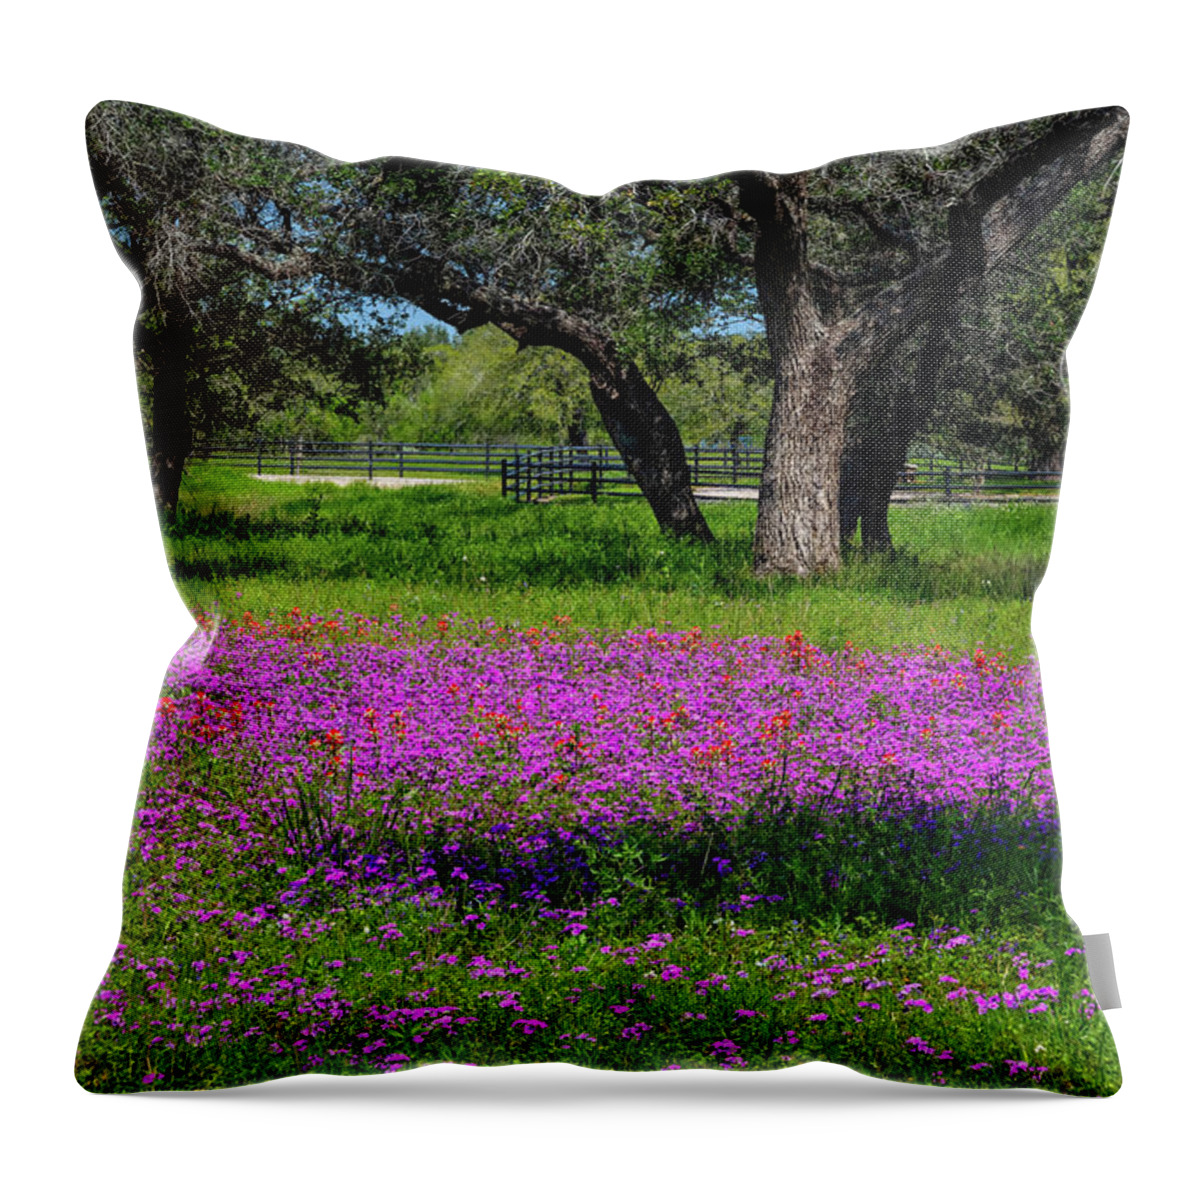 Texas Throw Pillow featuring the photograph Country Heaven by Lynn Bauer